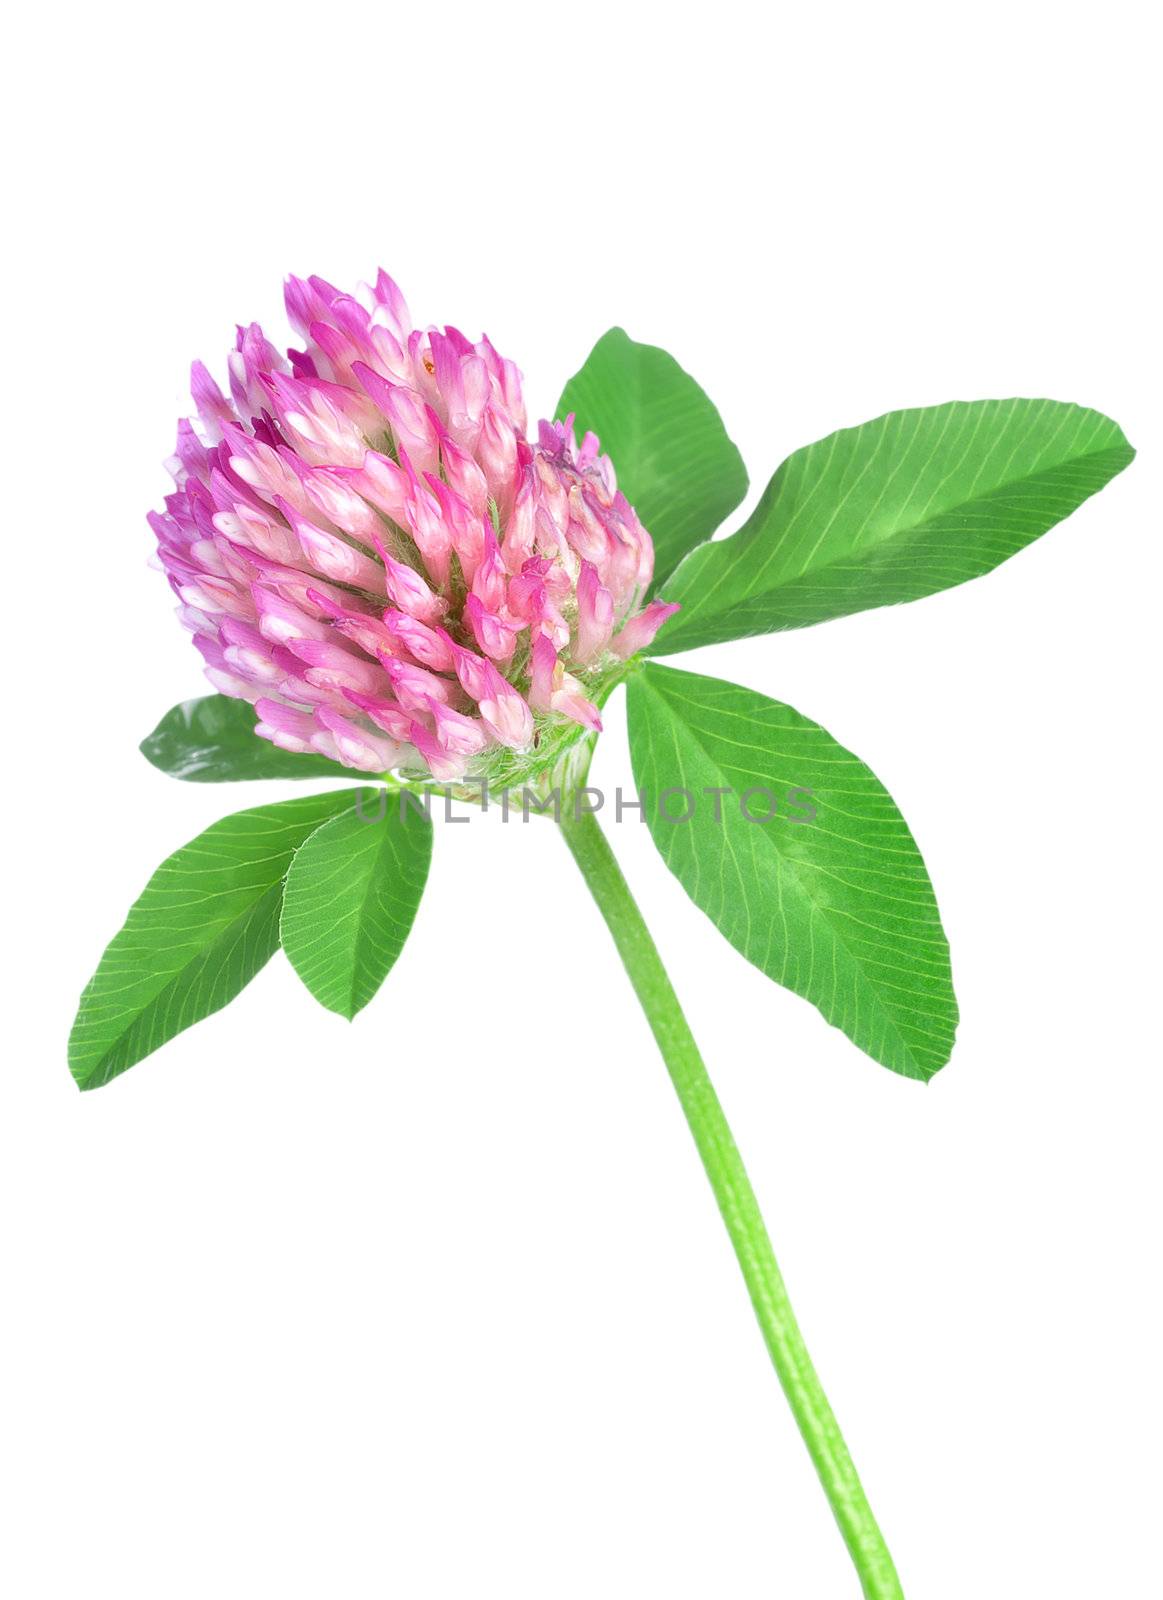 Red clover by Givaga